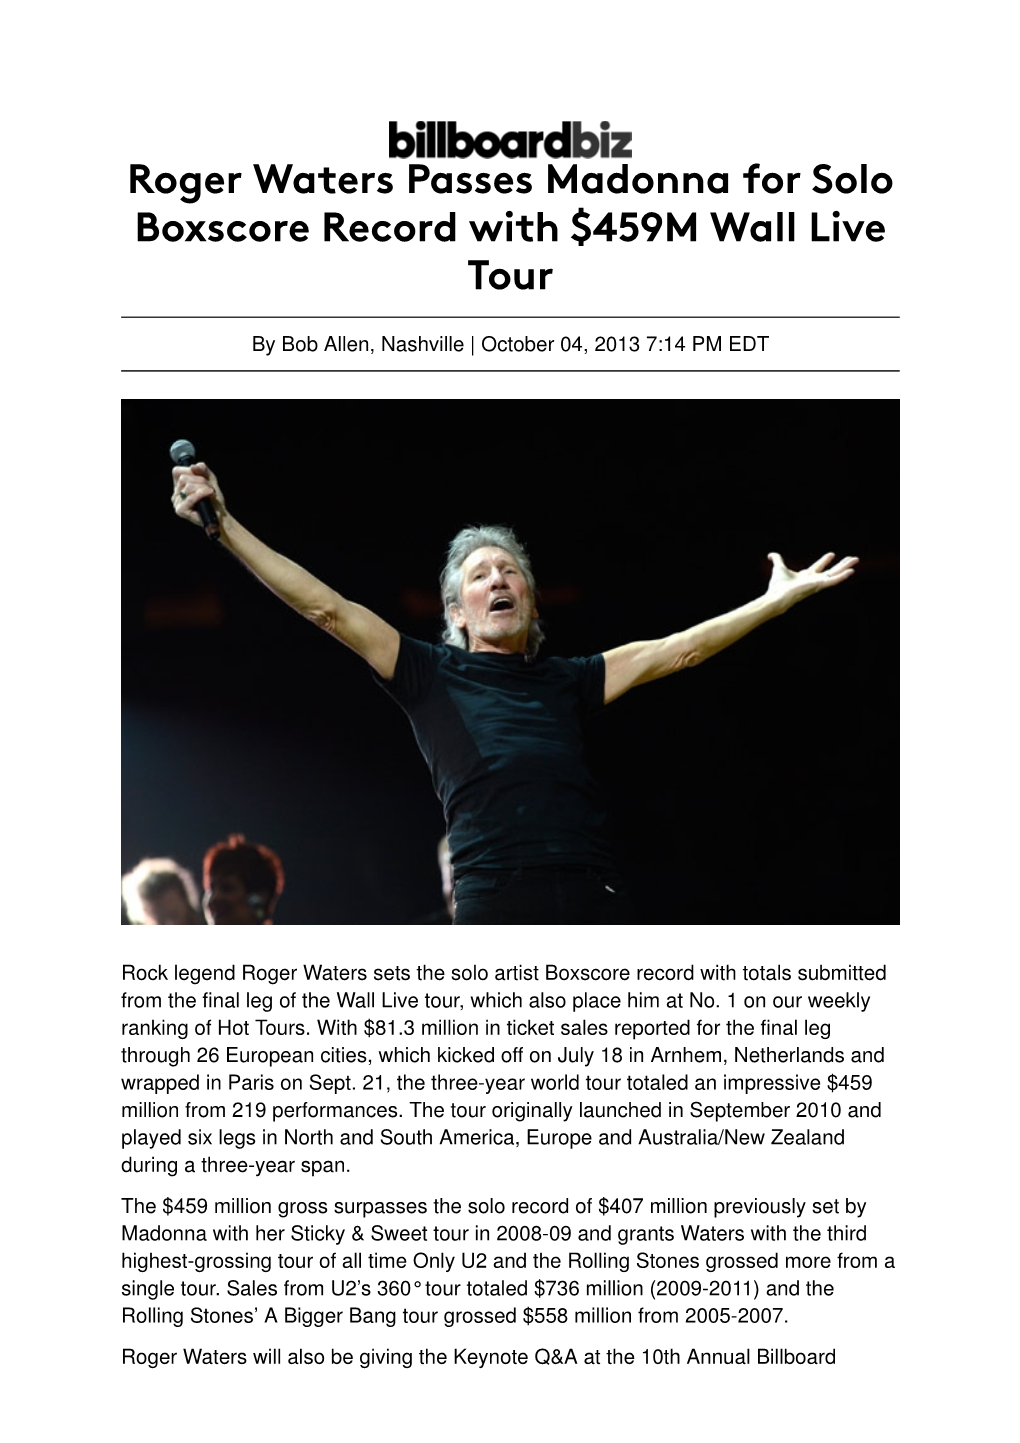 Roger Waters Passes Madonna for Solo Boxscore Record with $459M Wall Live Tour